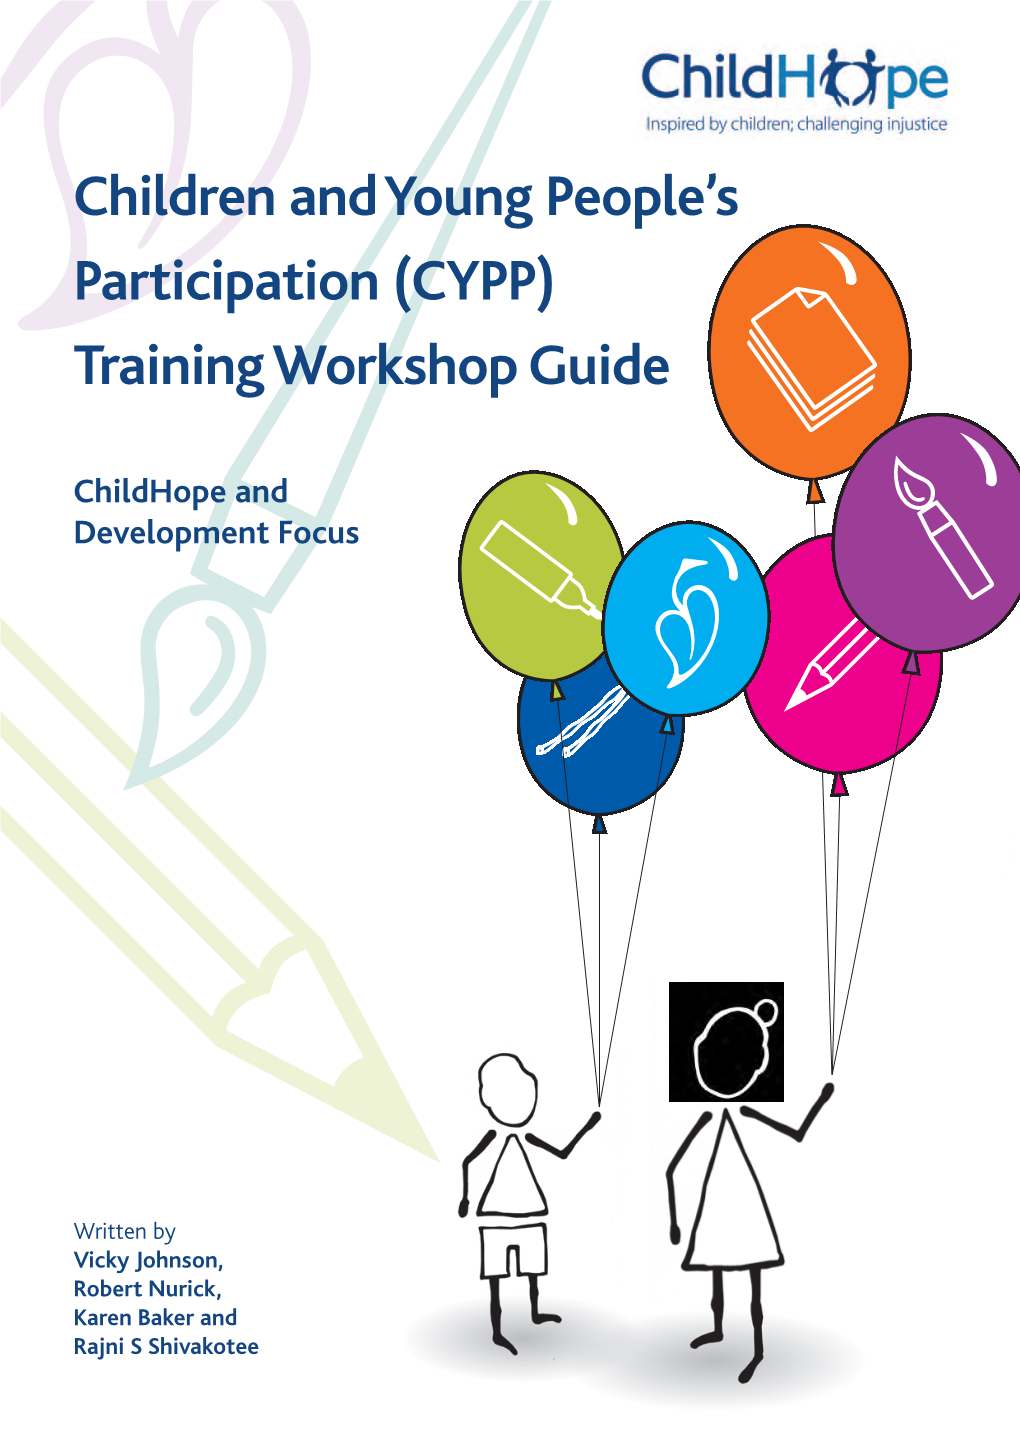 Children and Young People's Participation – Training Workshop